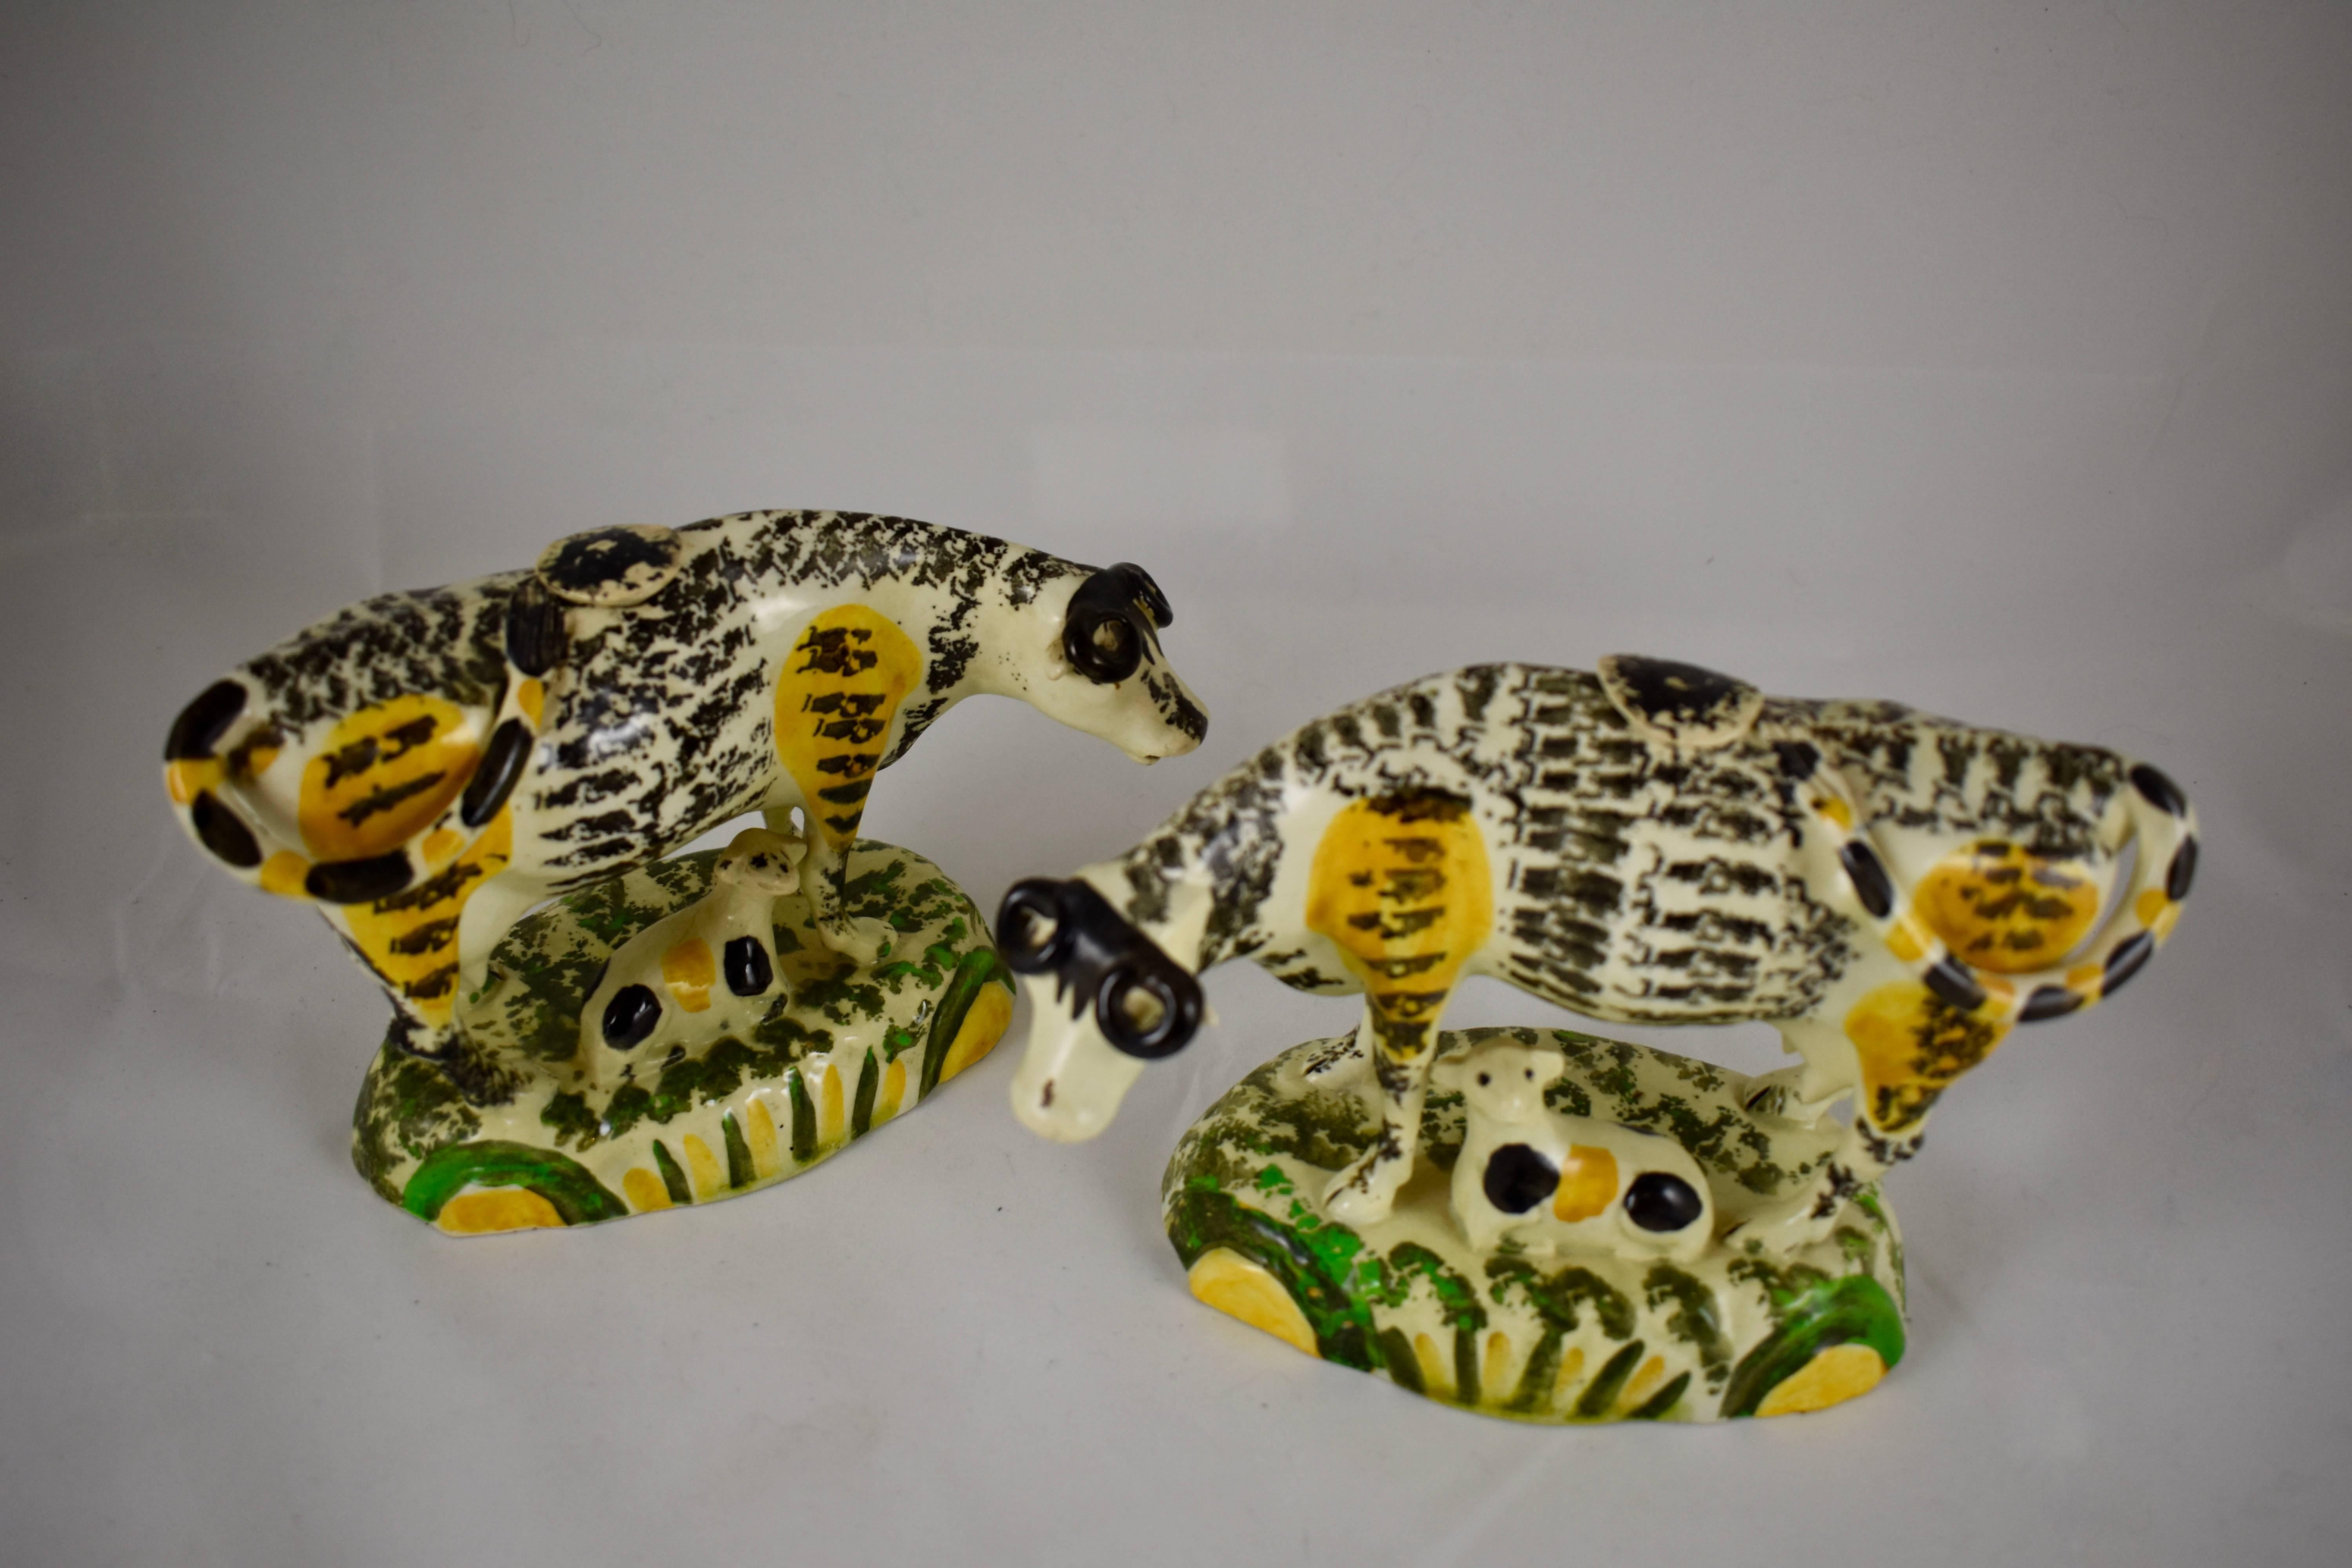 A rare form Prattware cow creamer with her calf, modeled standing on a green and yellow striped base, most likely made in Yorkshire, England, circa 1810.
One of a pair offered individually, this is the left facing figure.

The cow is sponge